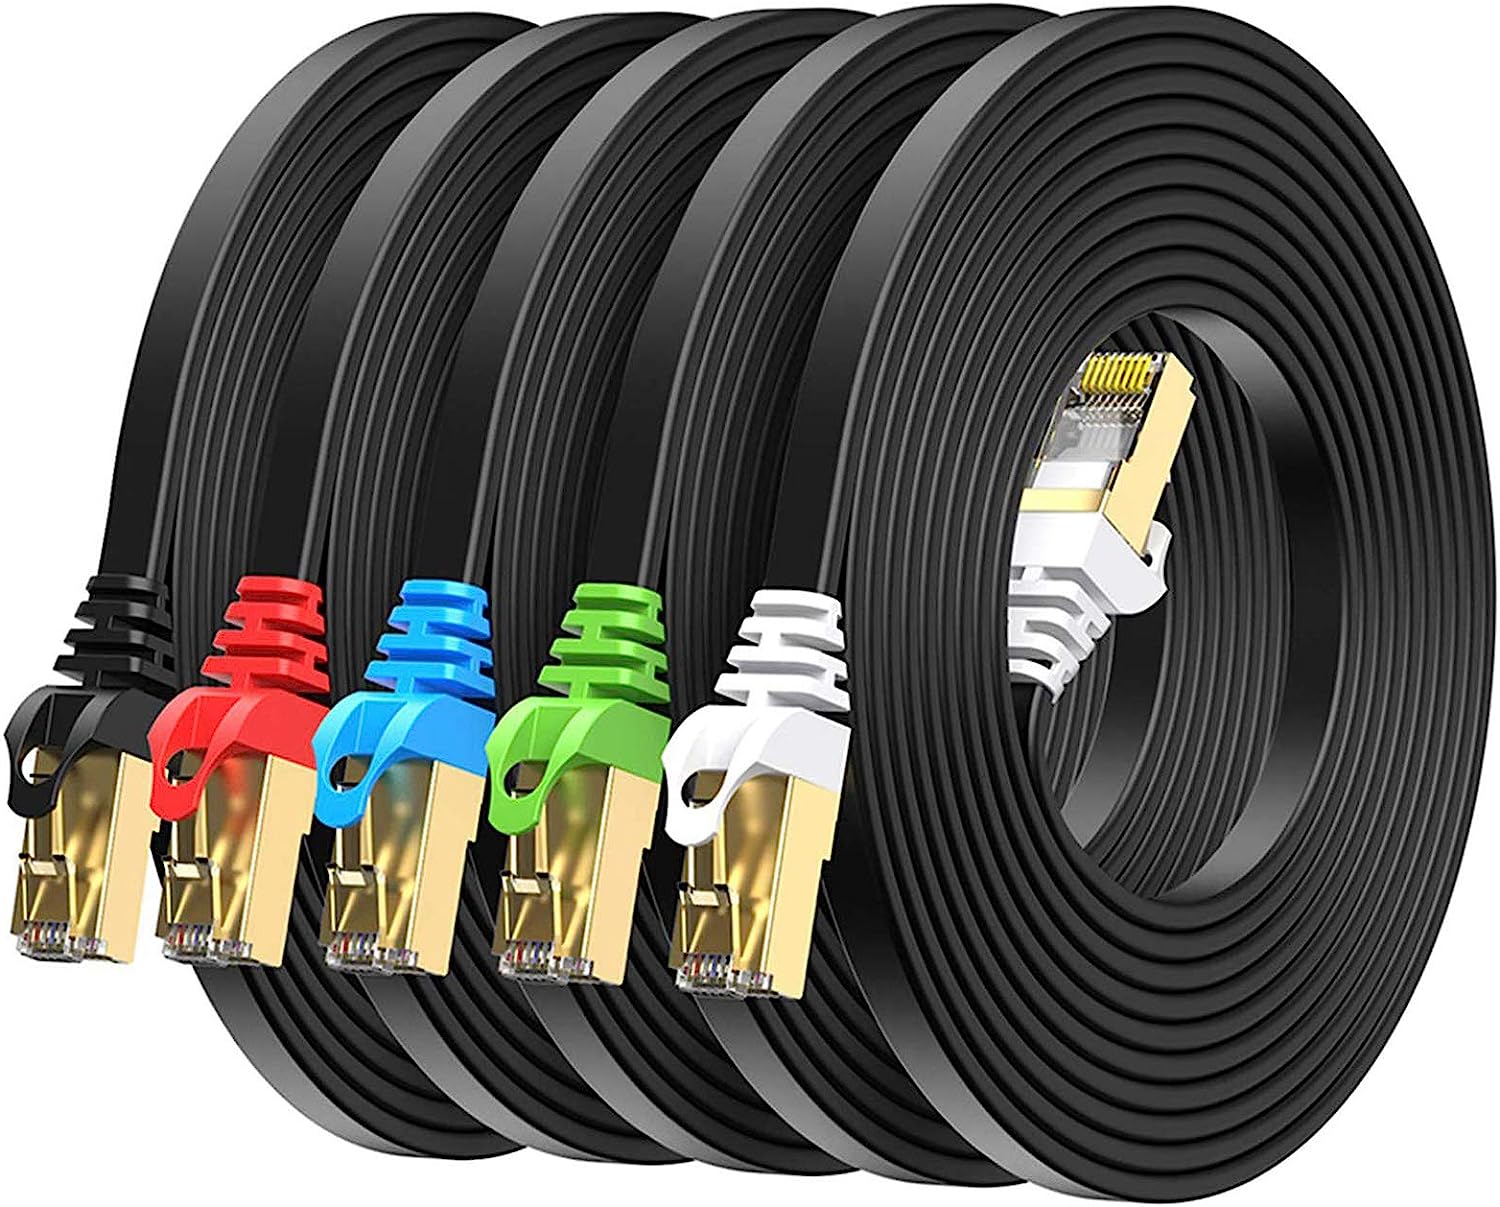 BUSOHE Cat8 Ethernet Cable 5FT 5 Pack Multi Color, [...]